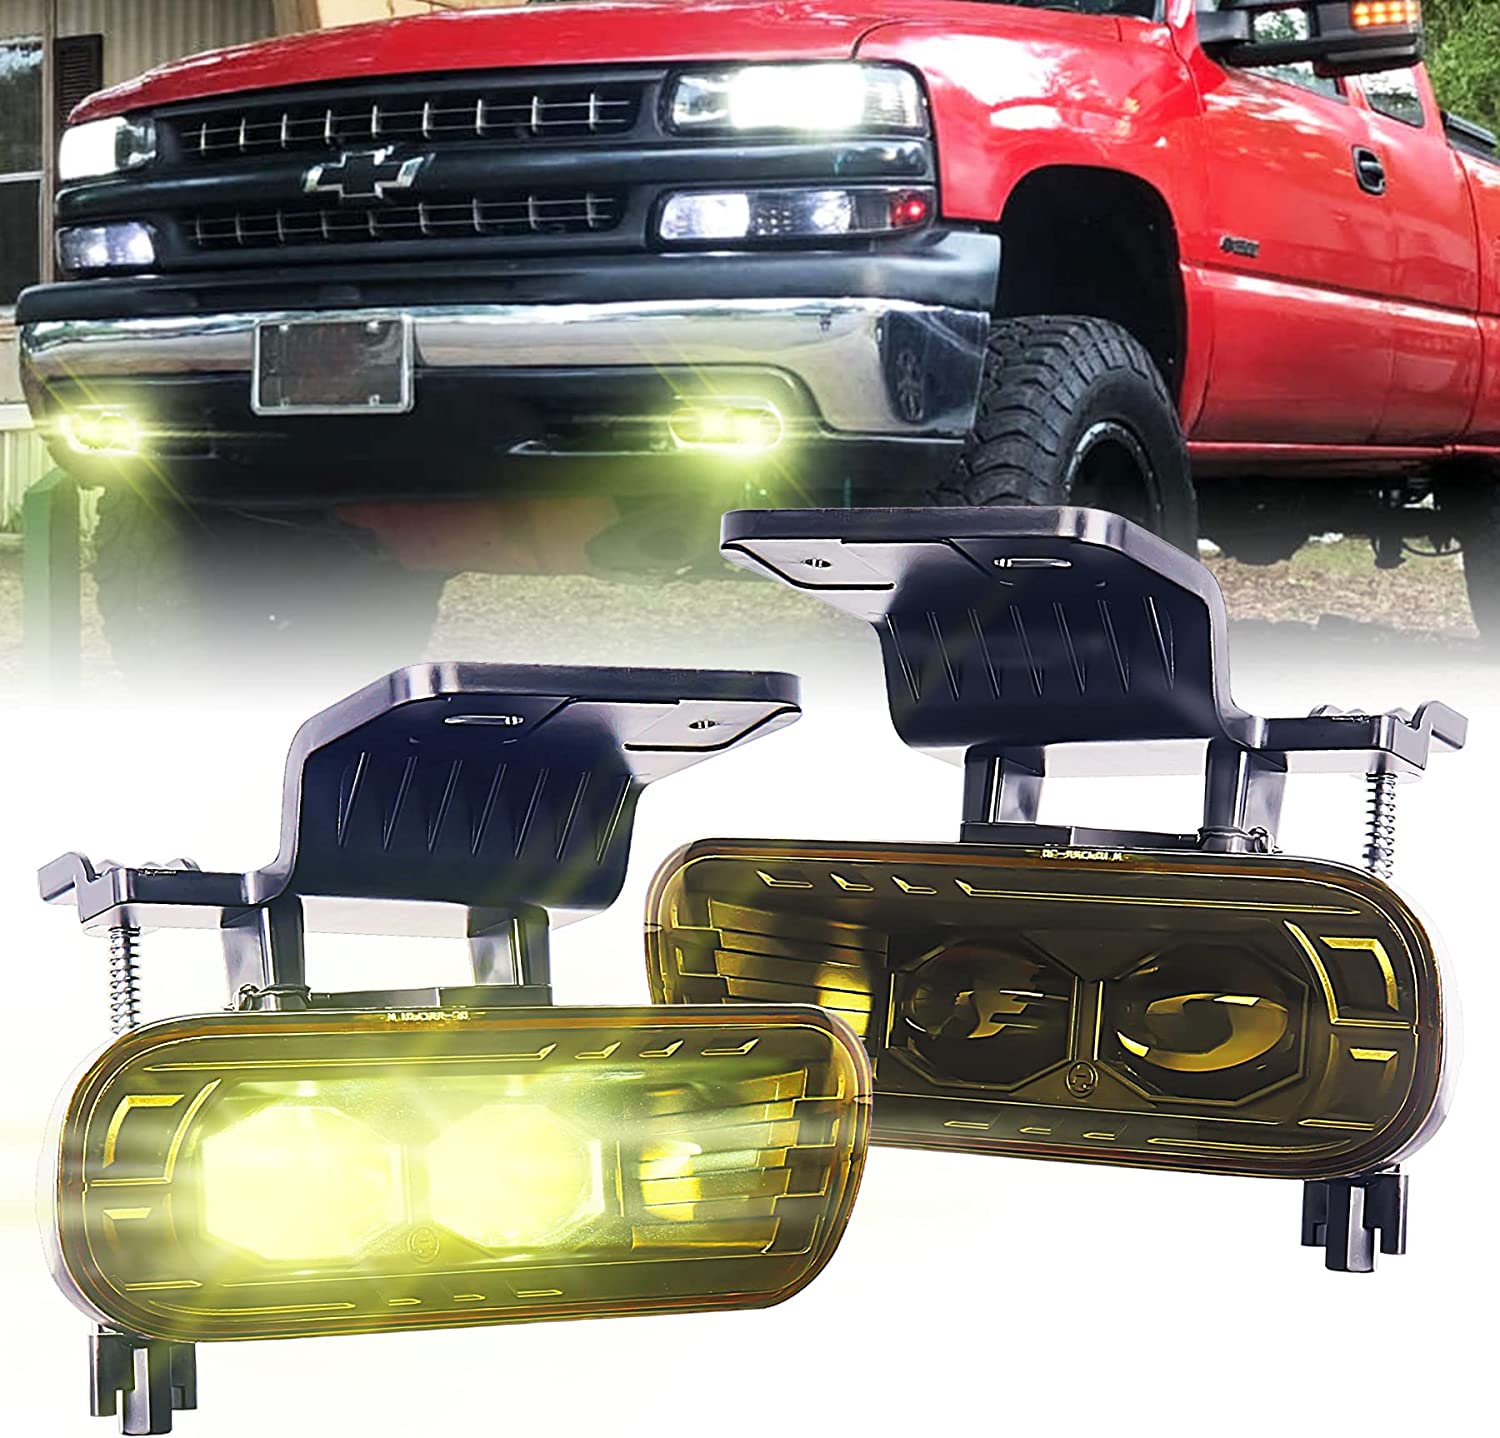 LED Fog Light Replacement, Yellow fog light Anti-Glare with Dual Projector Compatible with 1992-2002 Chevy Silverado, 2000-2001 Silverado 3500, 2000-2006 Chevrolet Suburban Tahoe